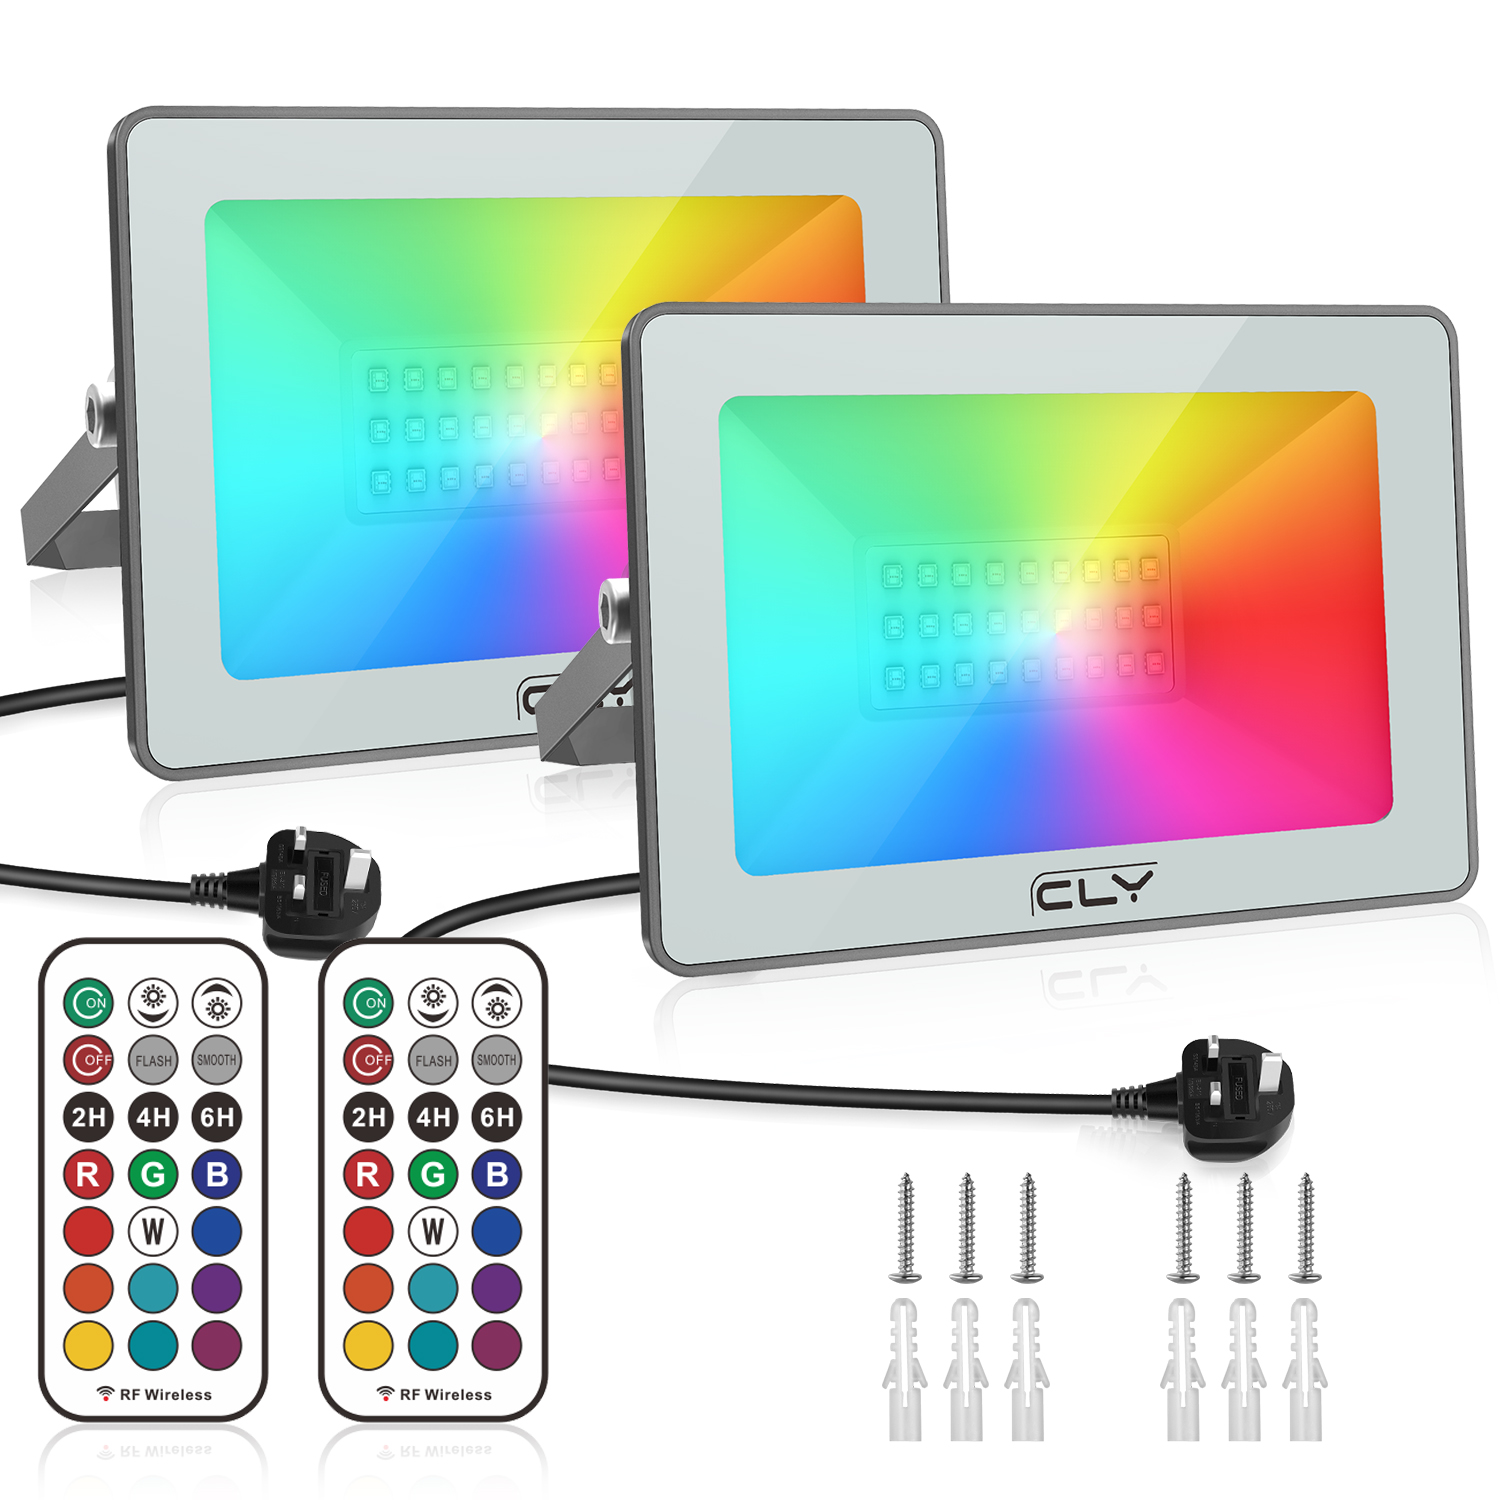 CLV 2 Pack 25W LED RGB Floodlight, Outdoor/Indoor Colour Changing Flood Lights with Remote Control, Memory Timing Function IP66 Waterproof Flood Light, Decoration for Stage Landscape Garden Party,Grey